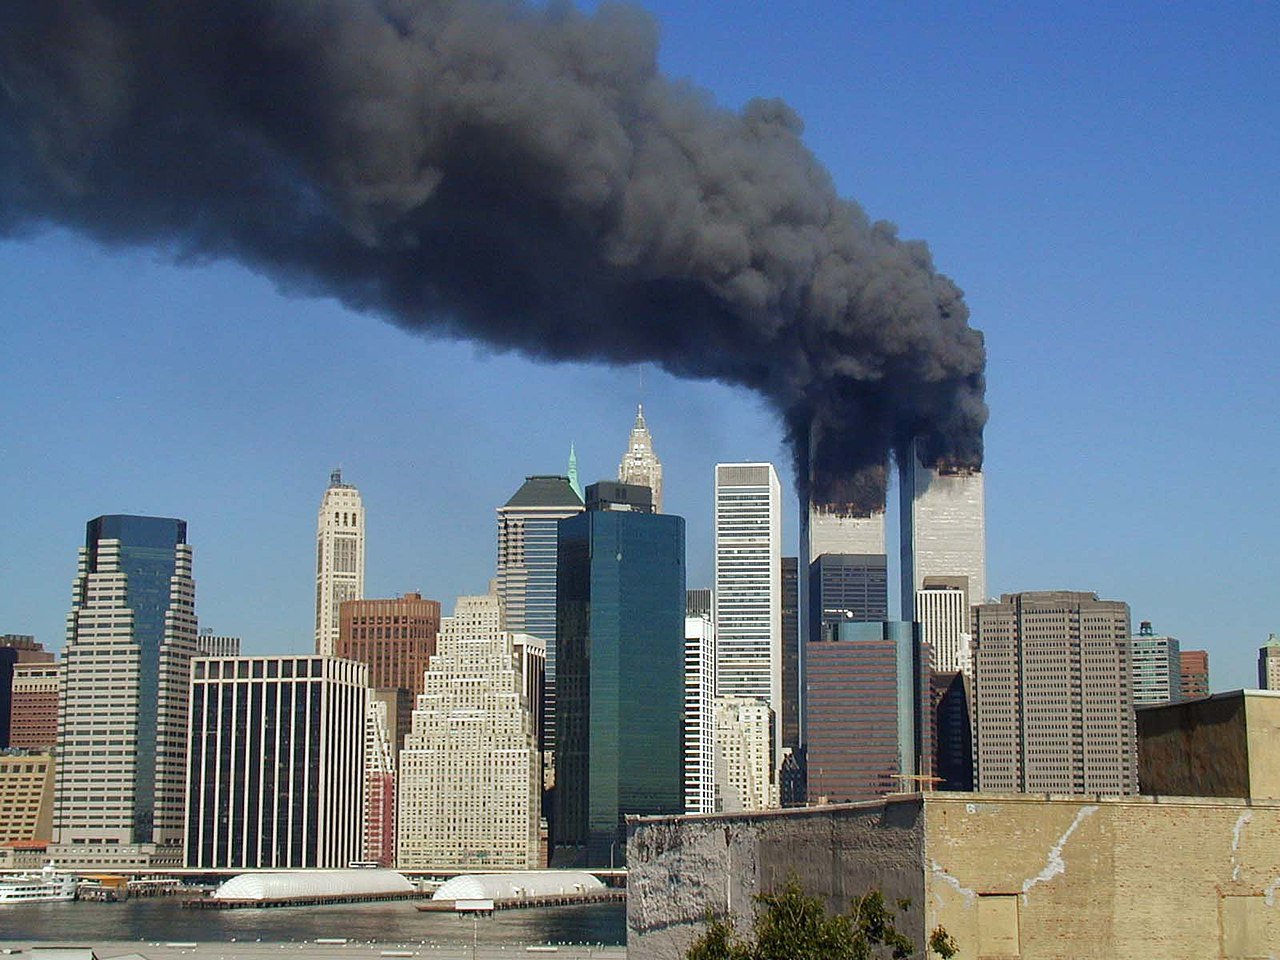 Bobby Chacon remembers seeing the Manhattan skyline from the air as his plane departed Newark International Airport. “It looked like smoke and glitter,” he said, recalling how the light hit the glass as it exploded out of the towers. Photo courtesy of Wikimedia Commons.